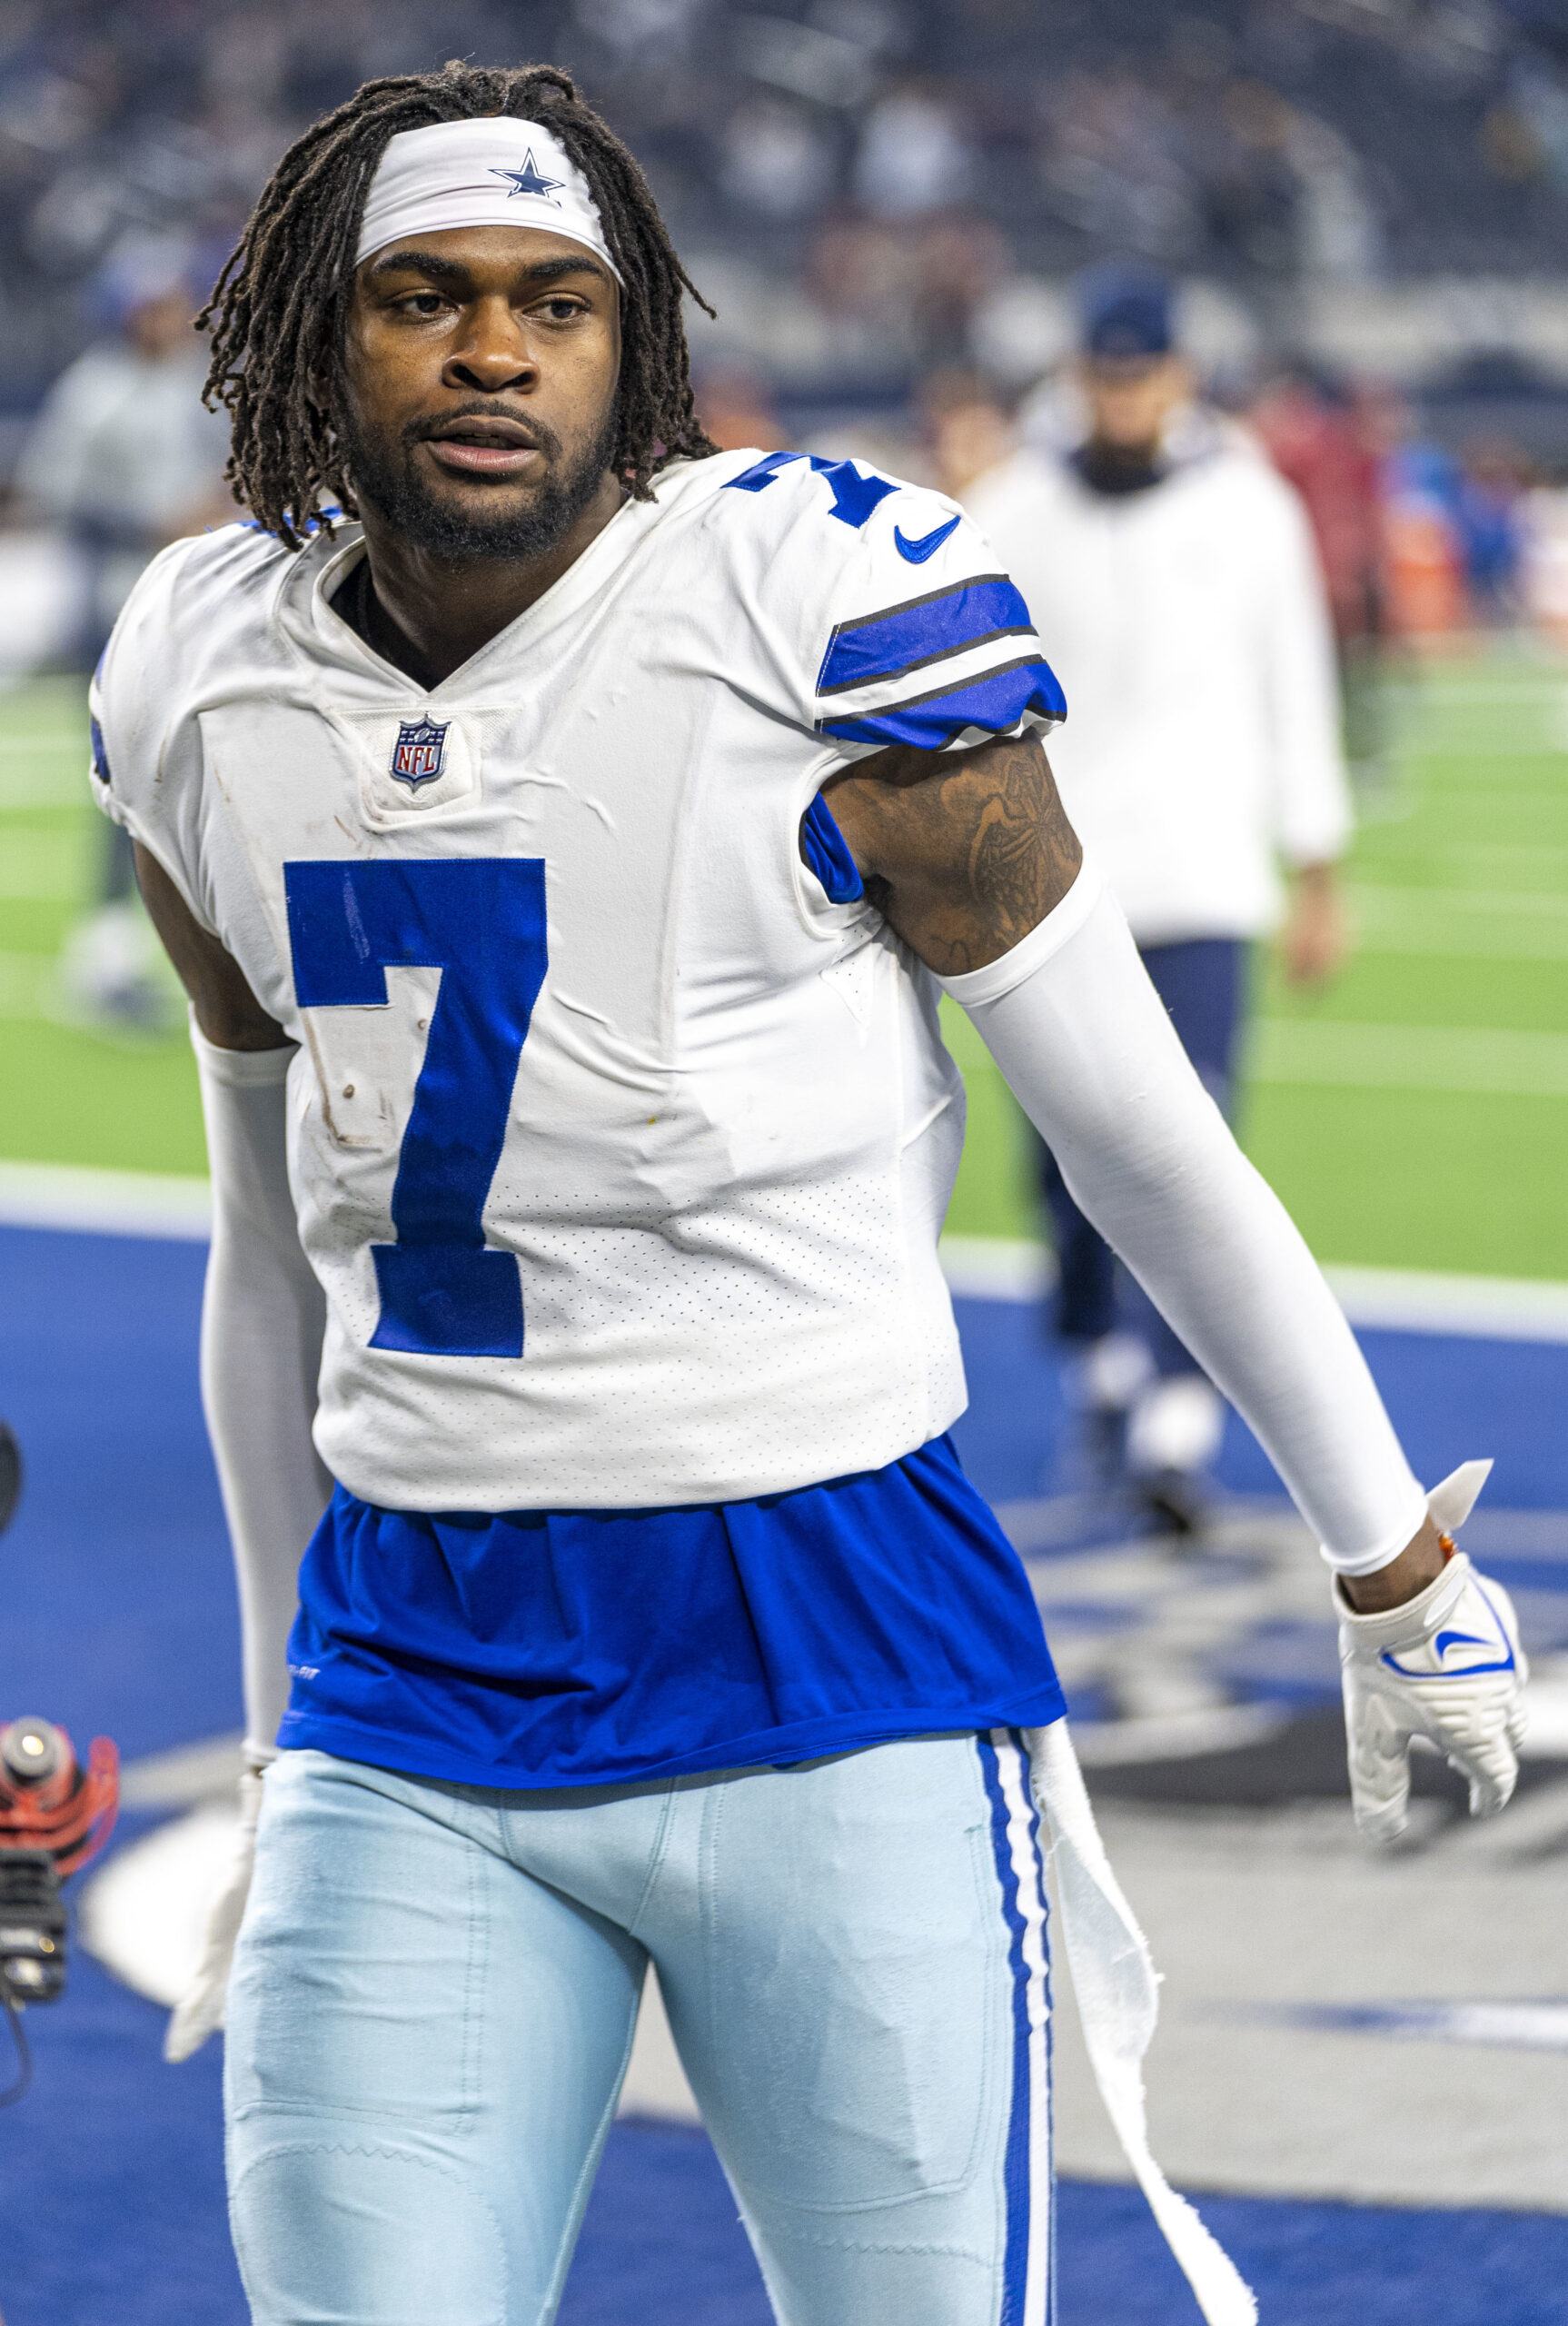 Trevon Diggs playing for Cowboys